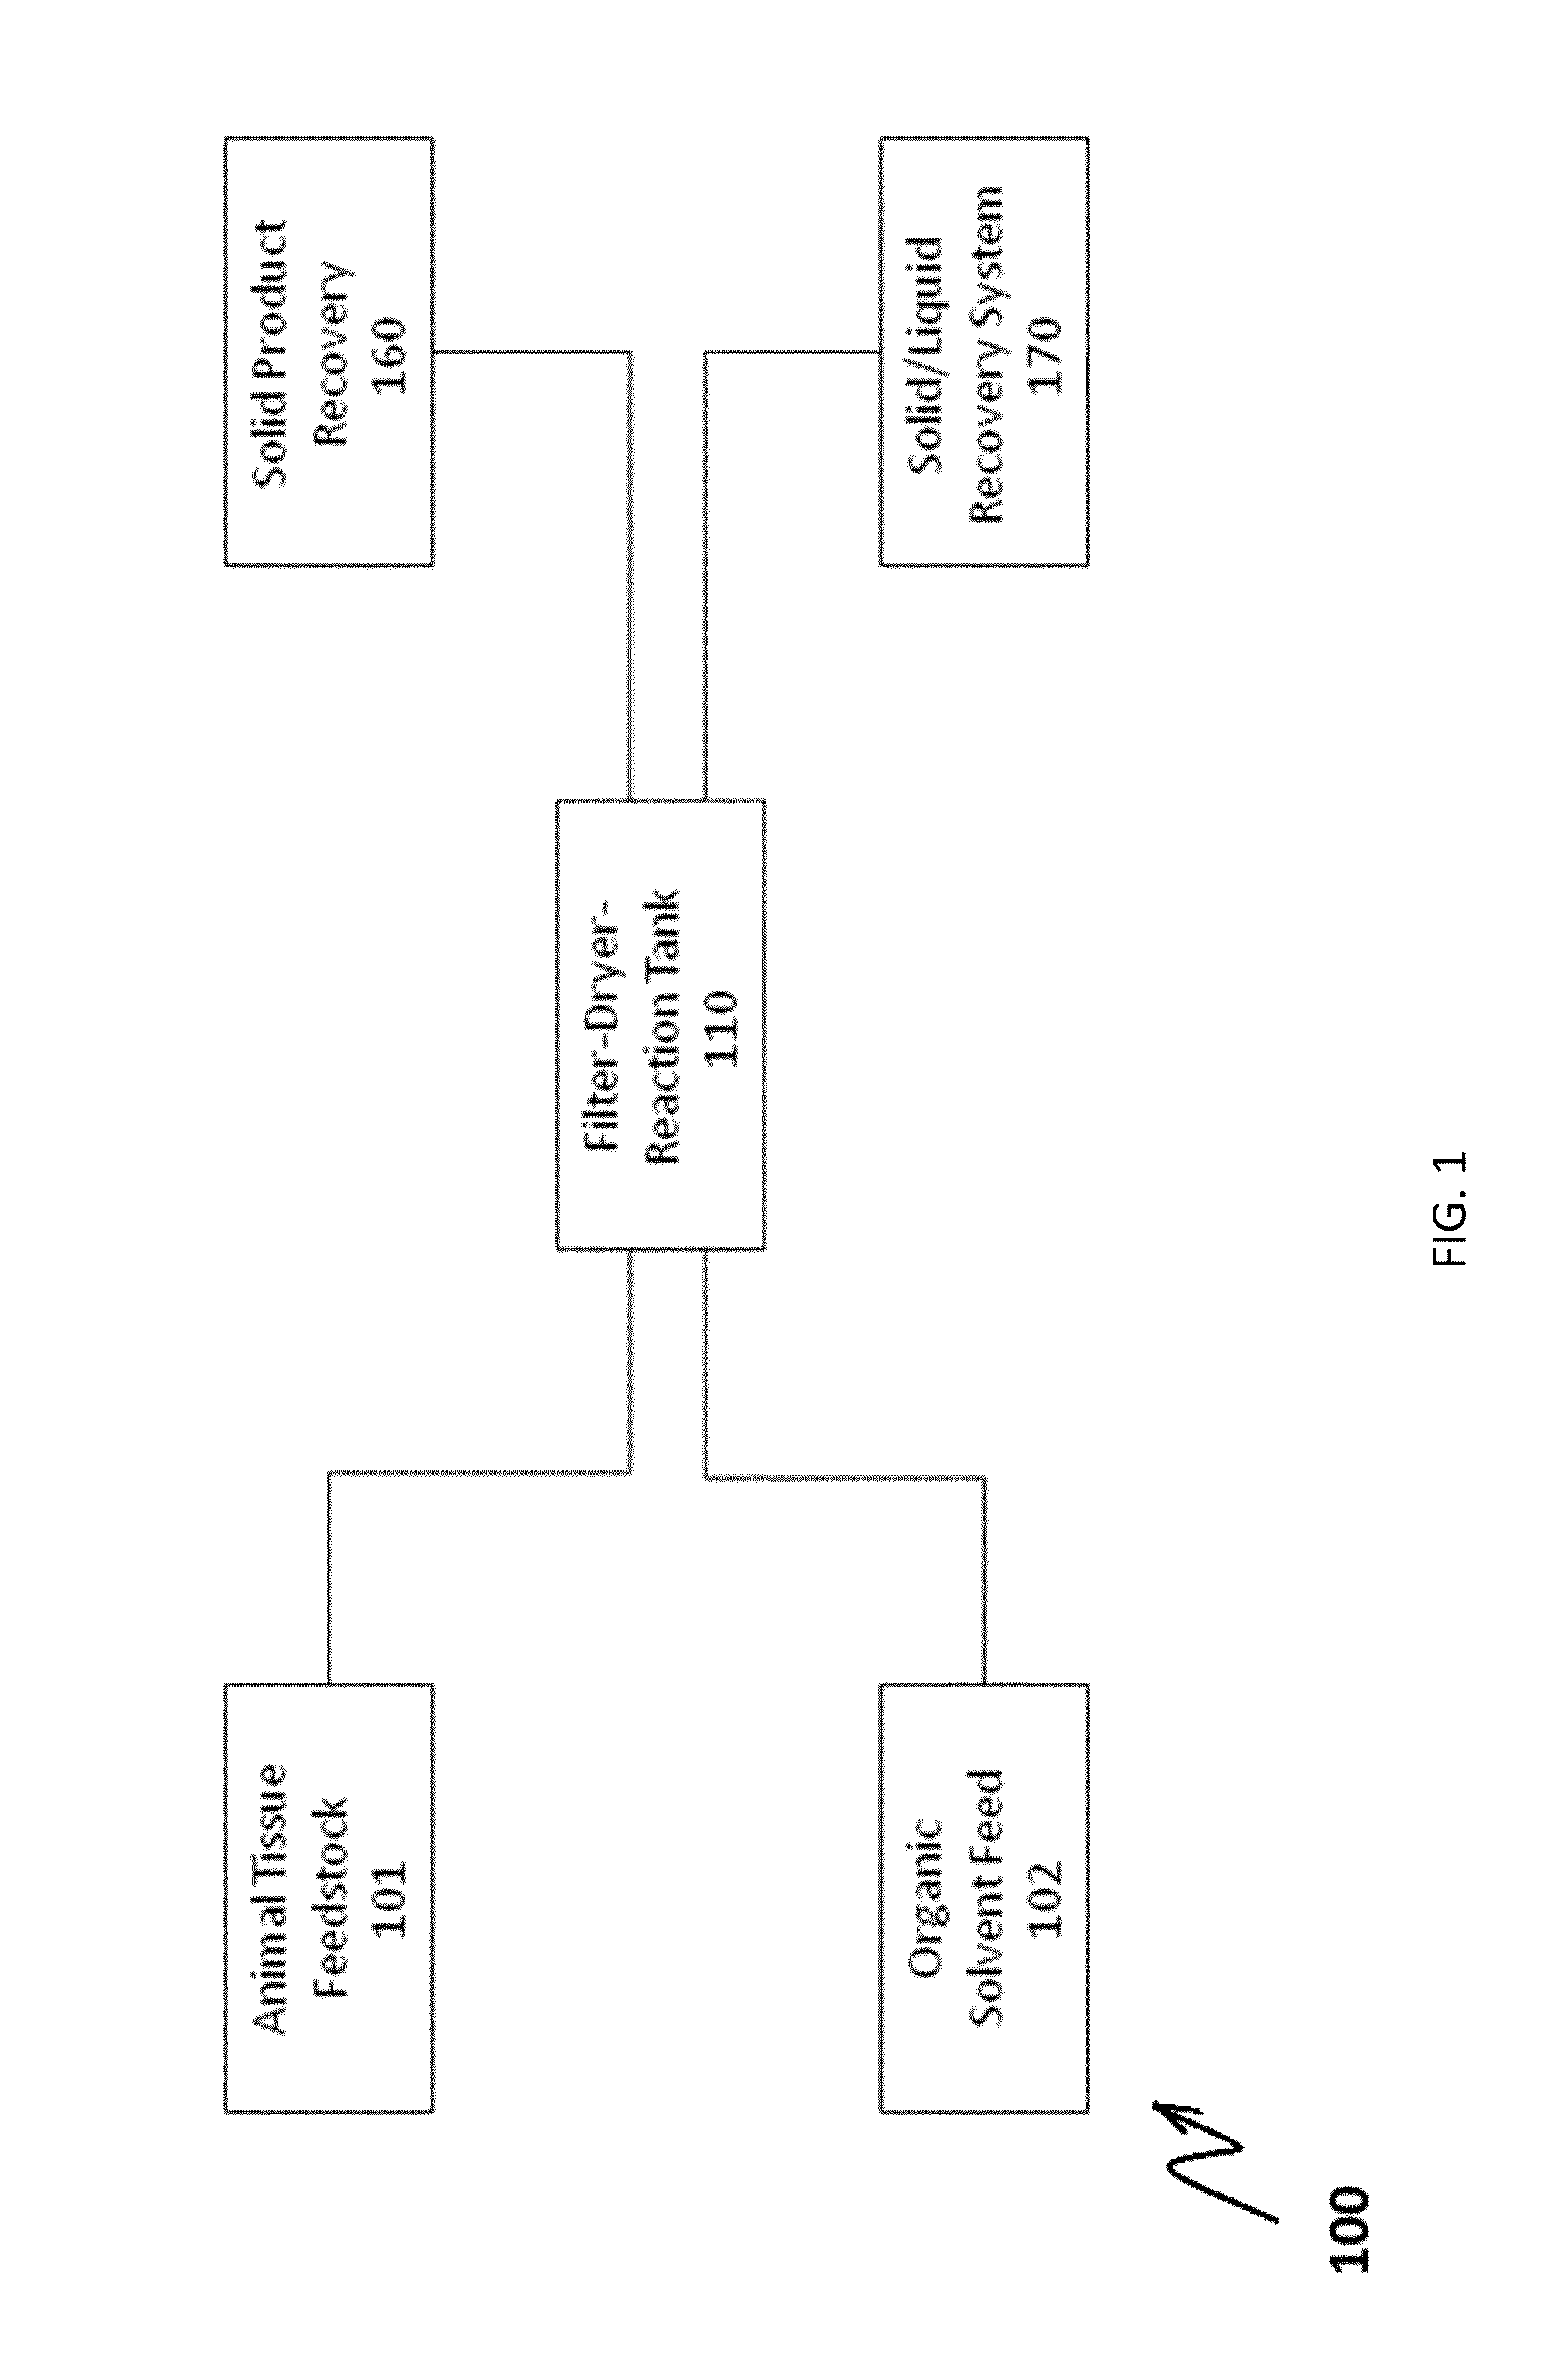 Automated method and system for recovering protein powder meal, pure omega 3 oil and purified distilled water from animal tissue